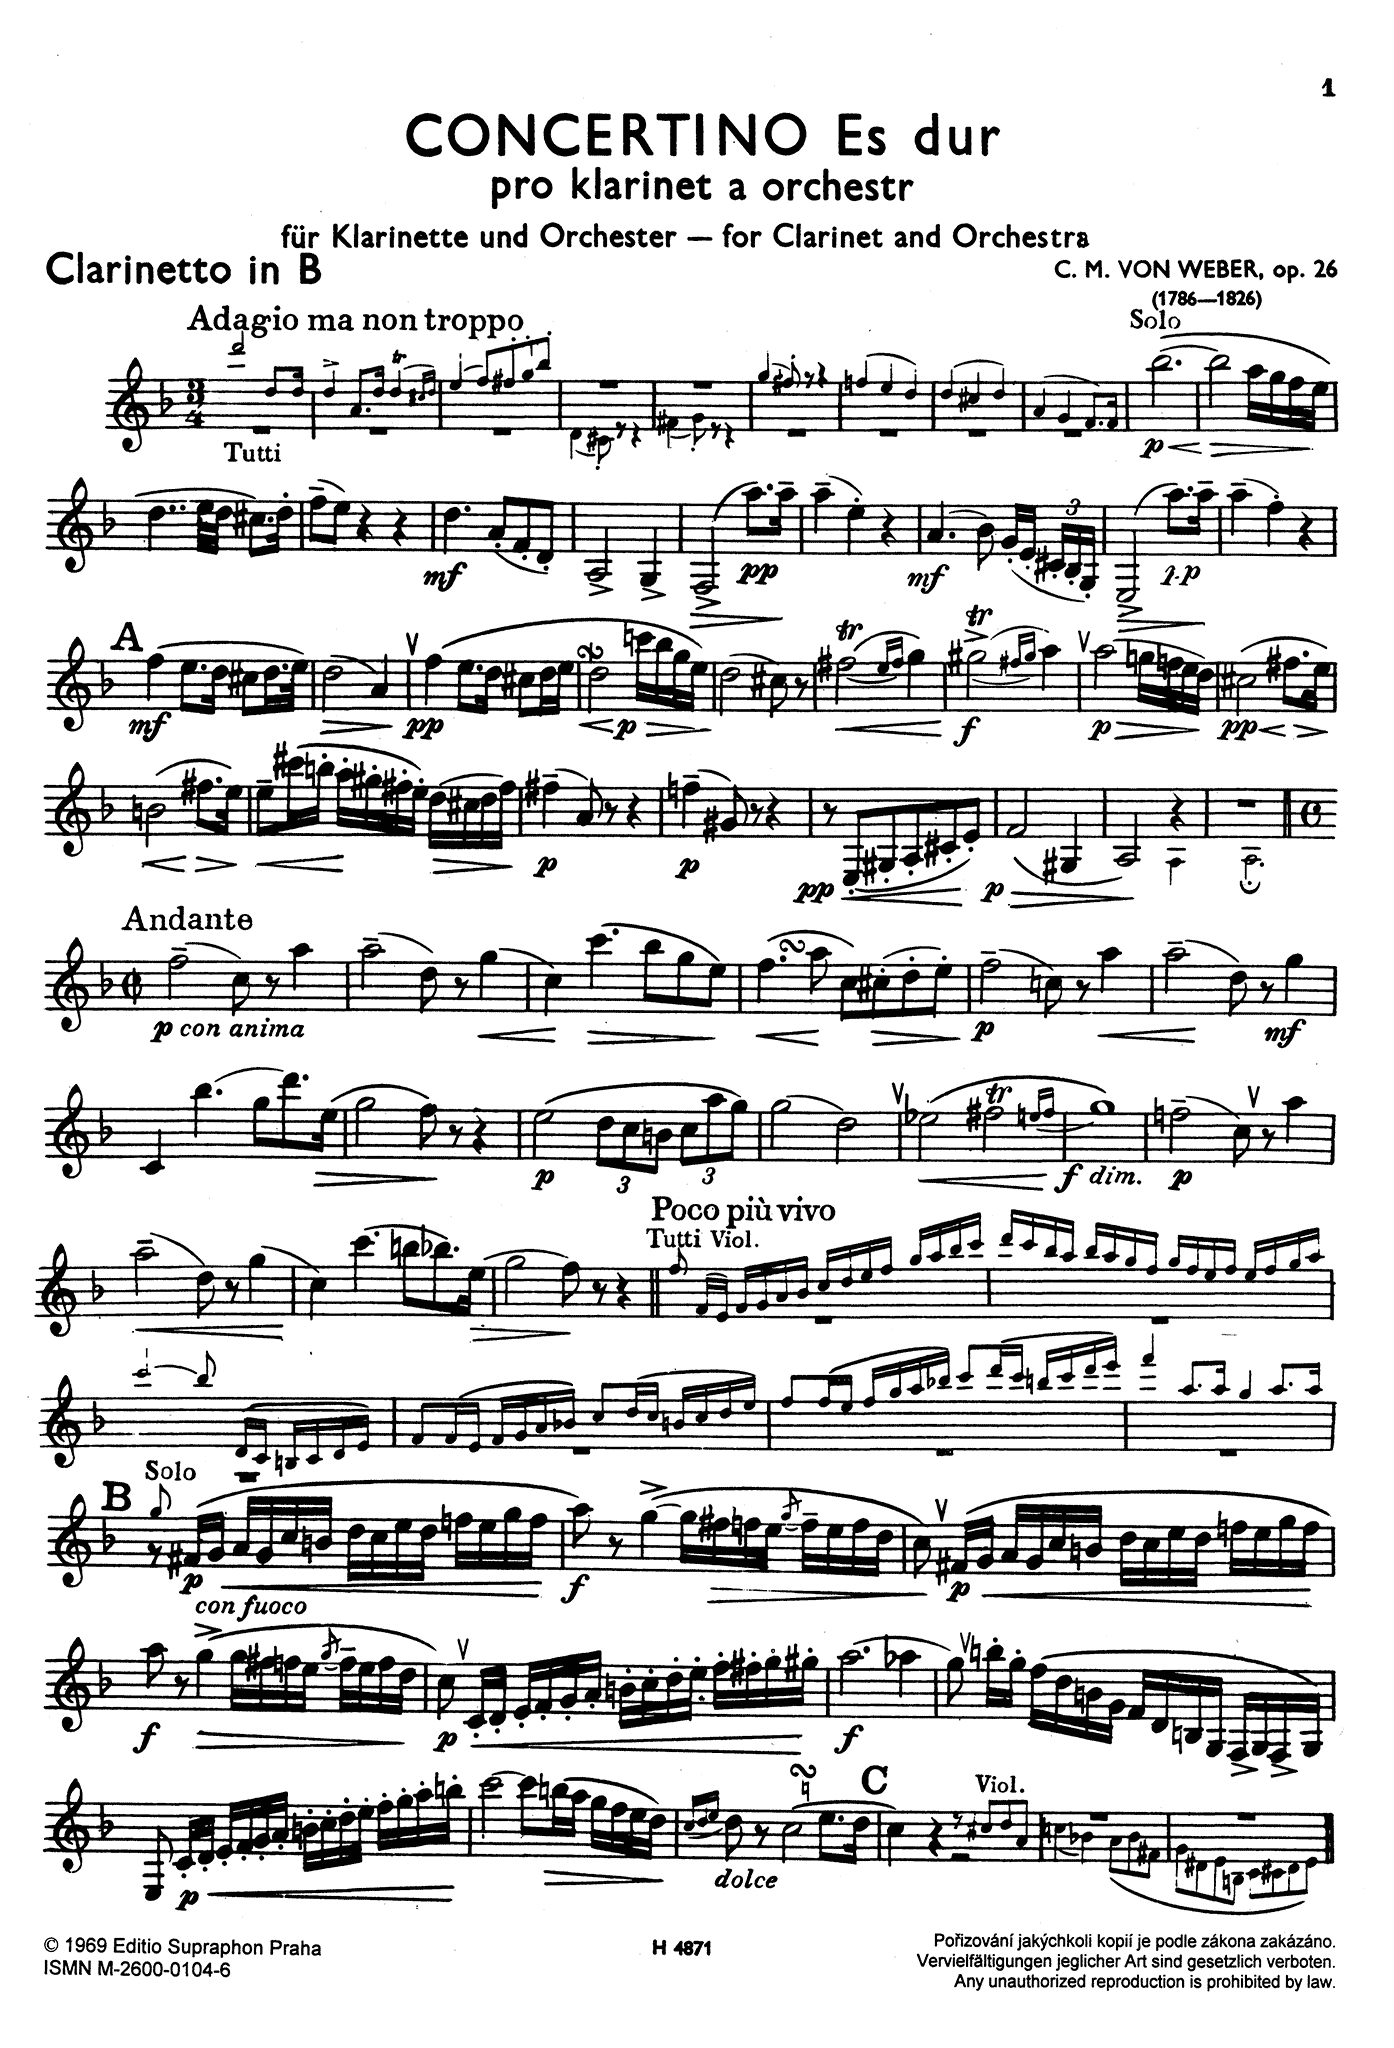 Concertino in E-flat Major, Op. 26, J. 109 Clarinet part